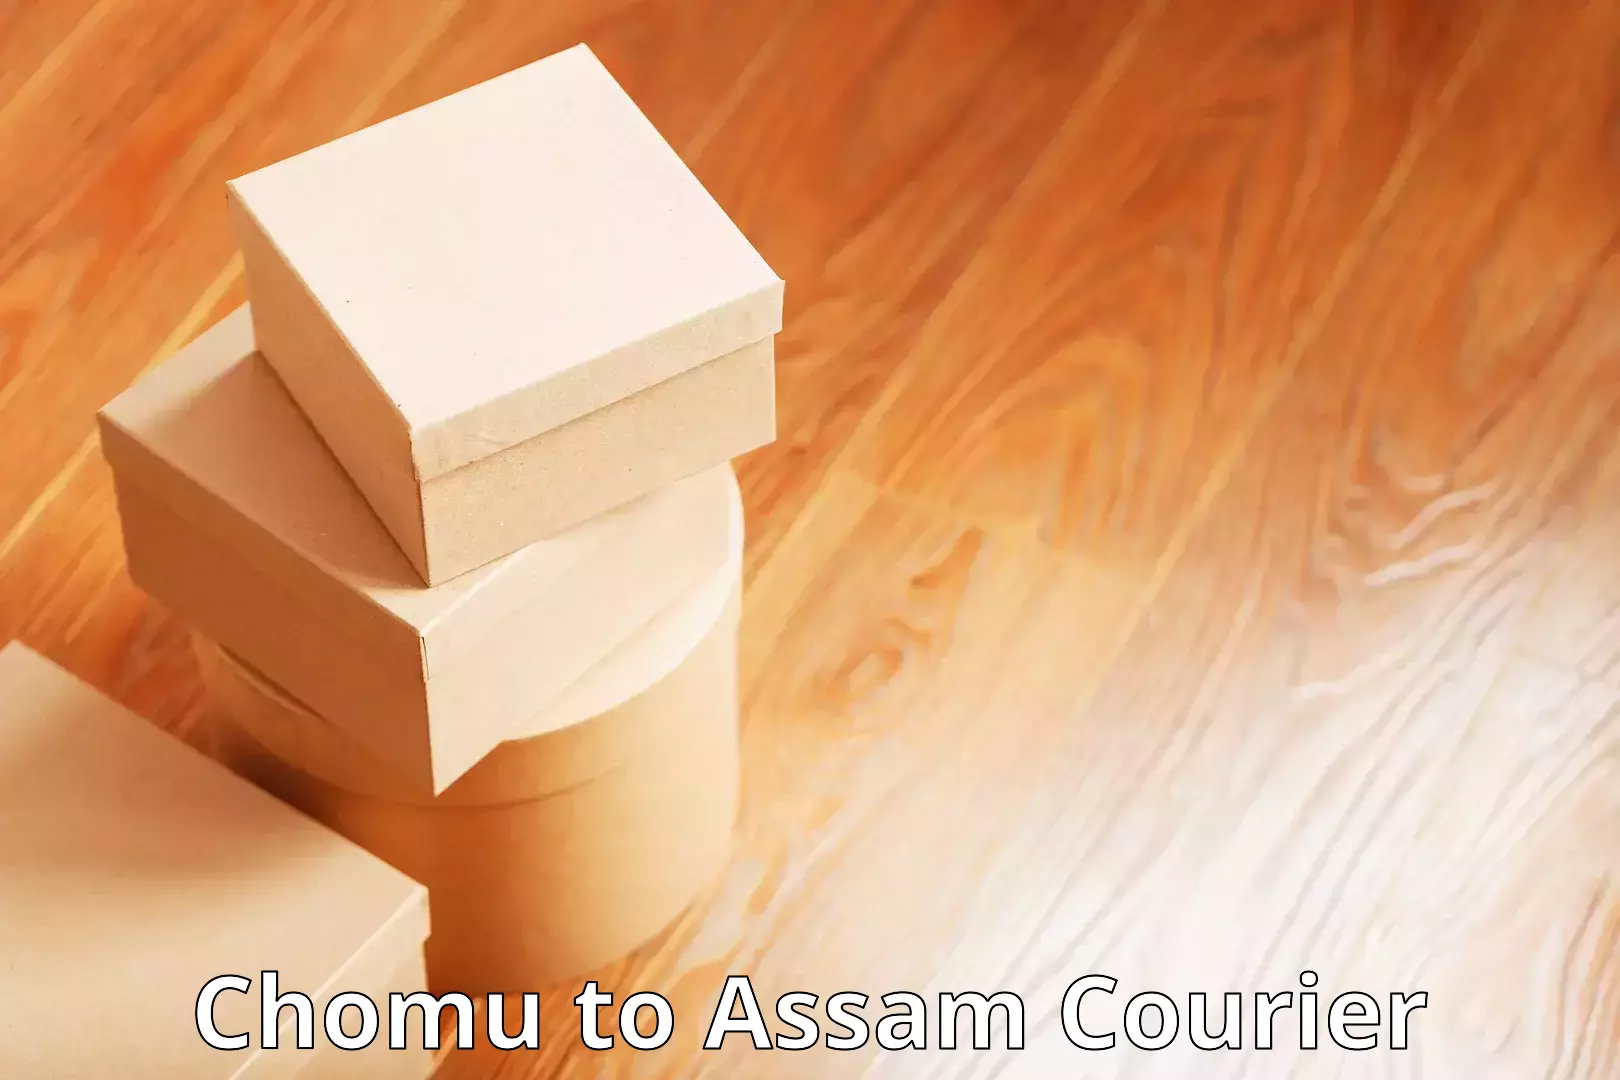 Global shipping networks Chomu to Assam